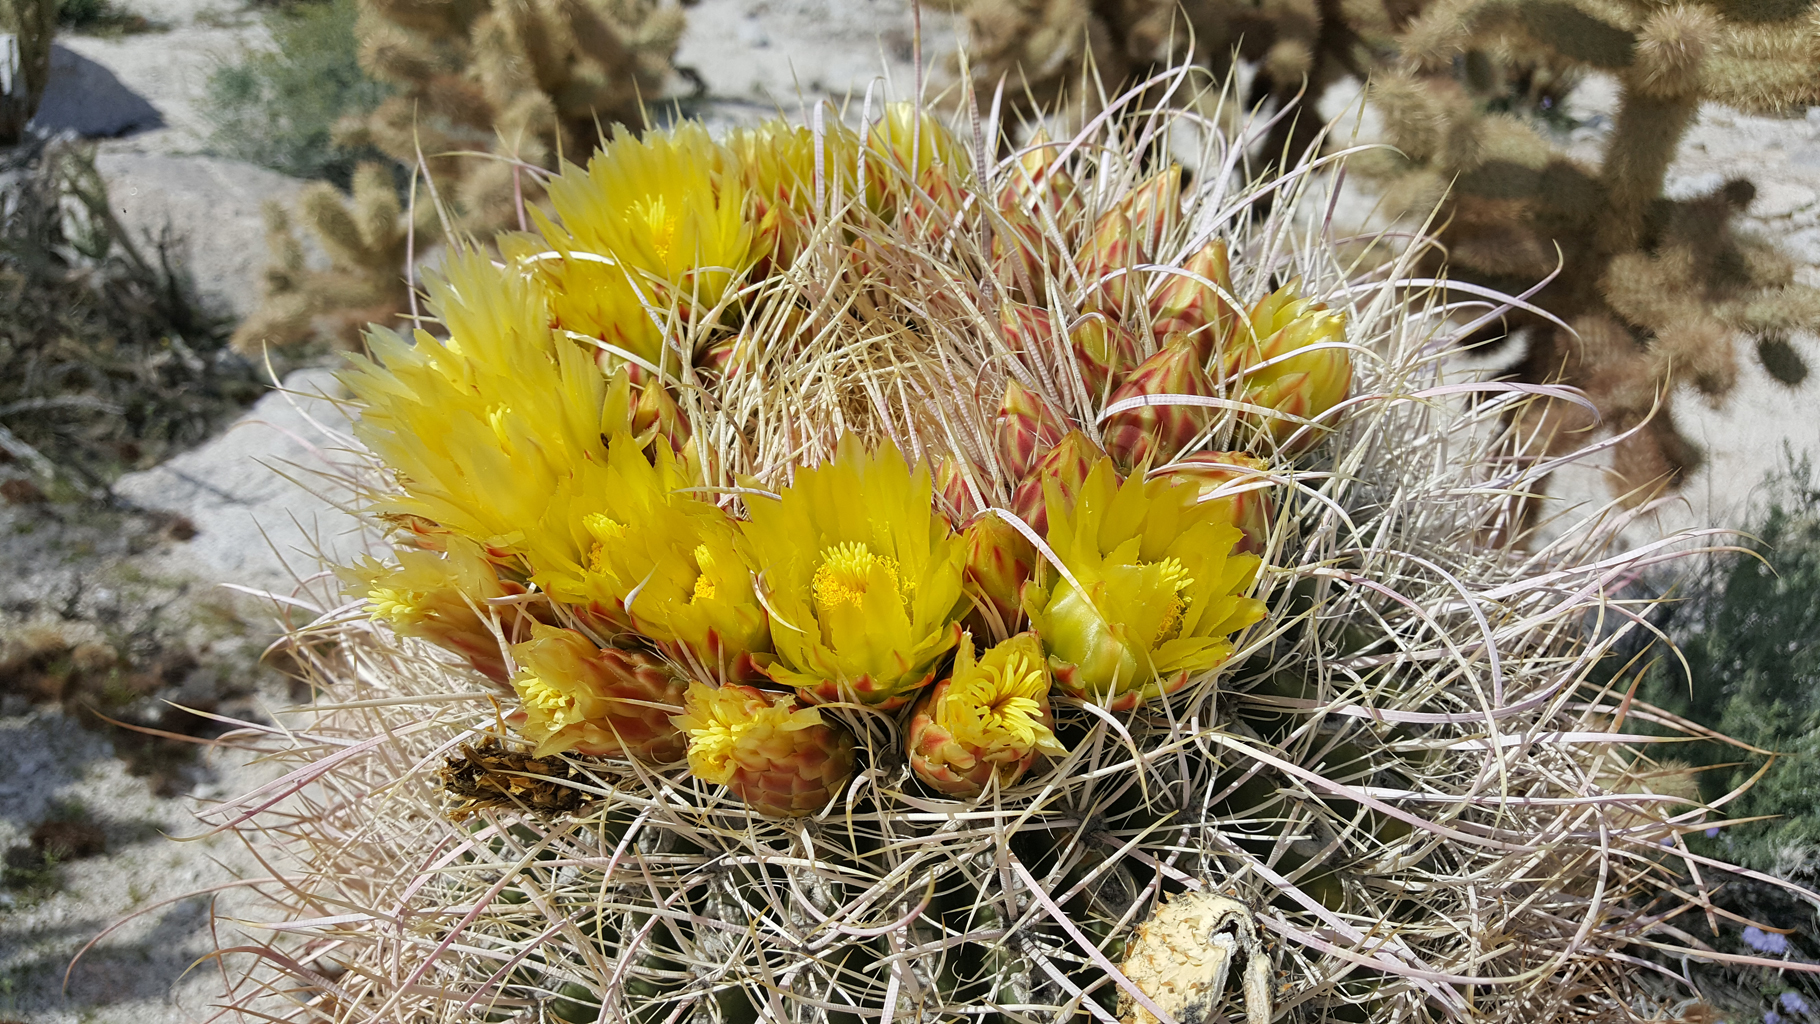 Many blooms on this barrel cactus